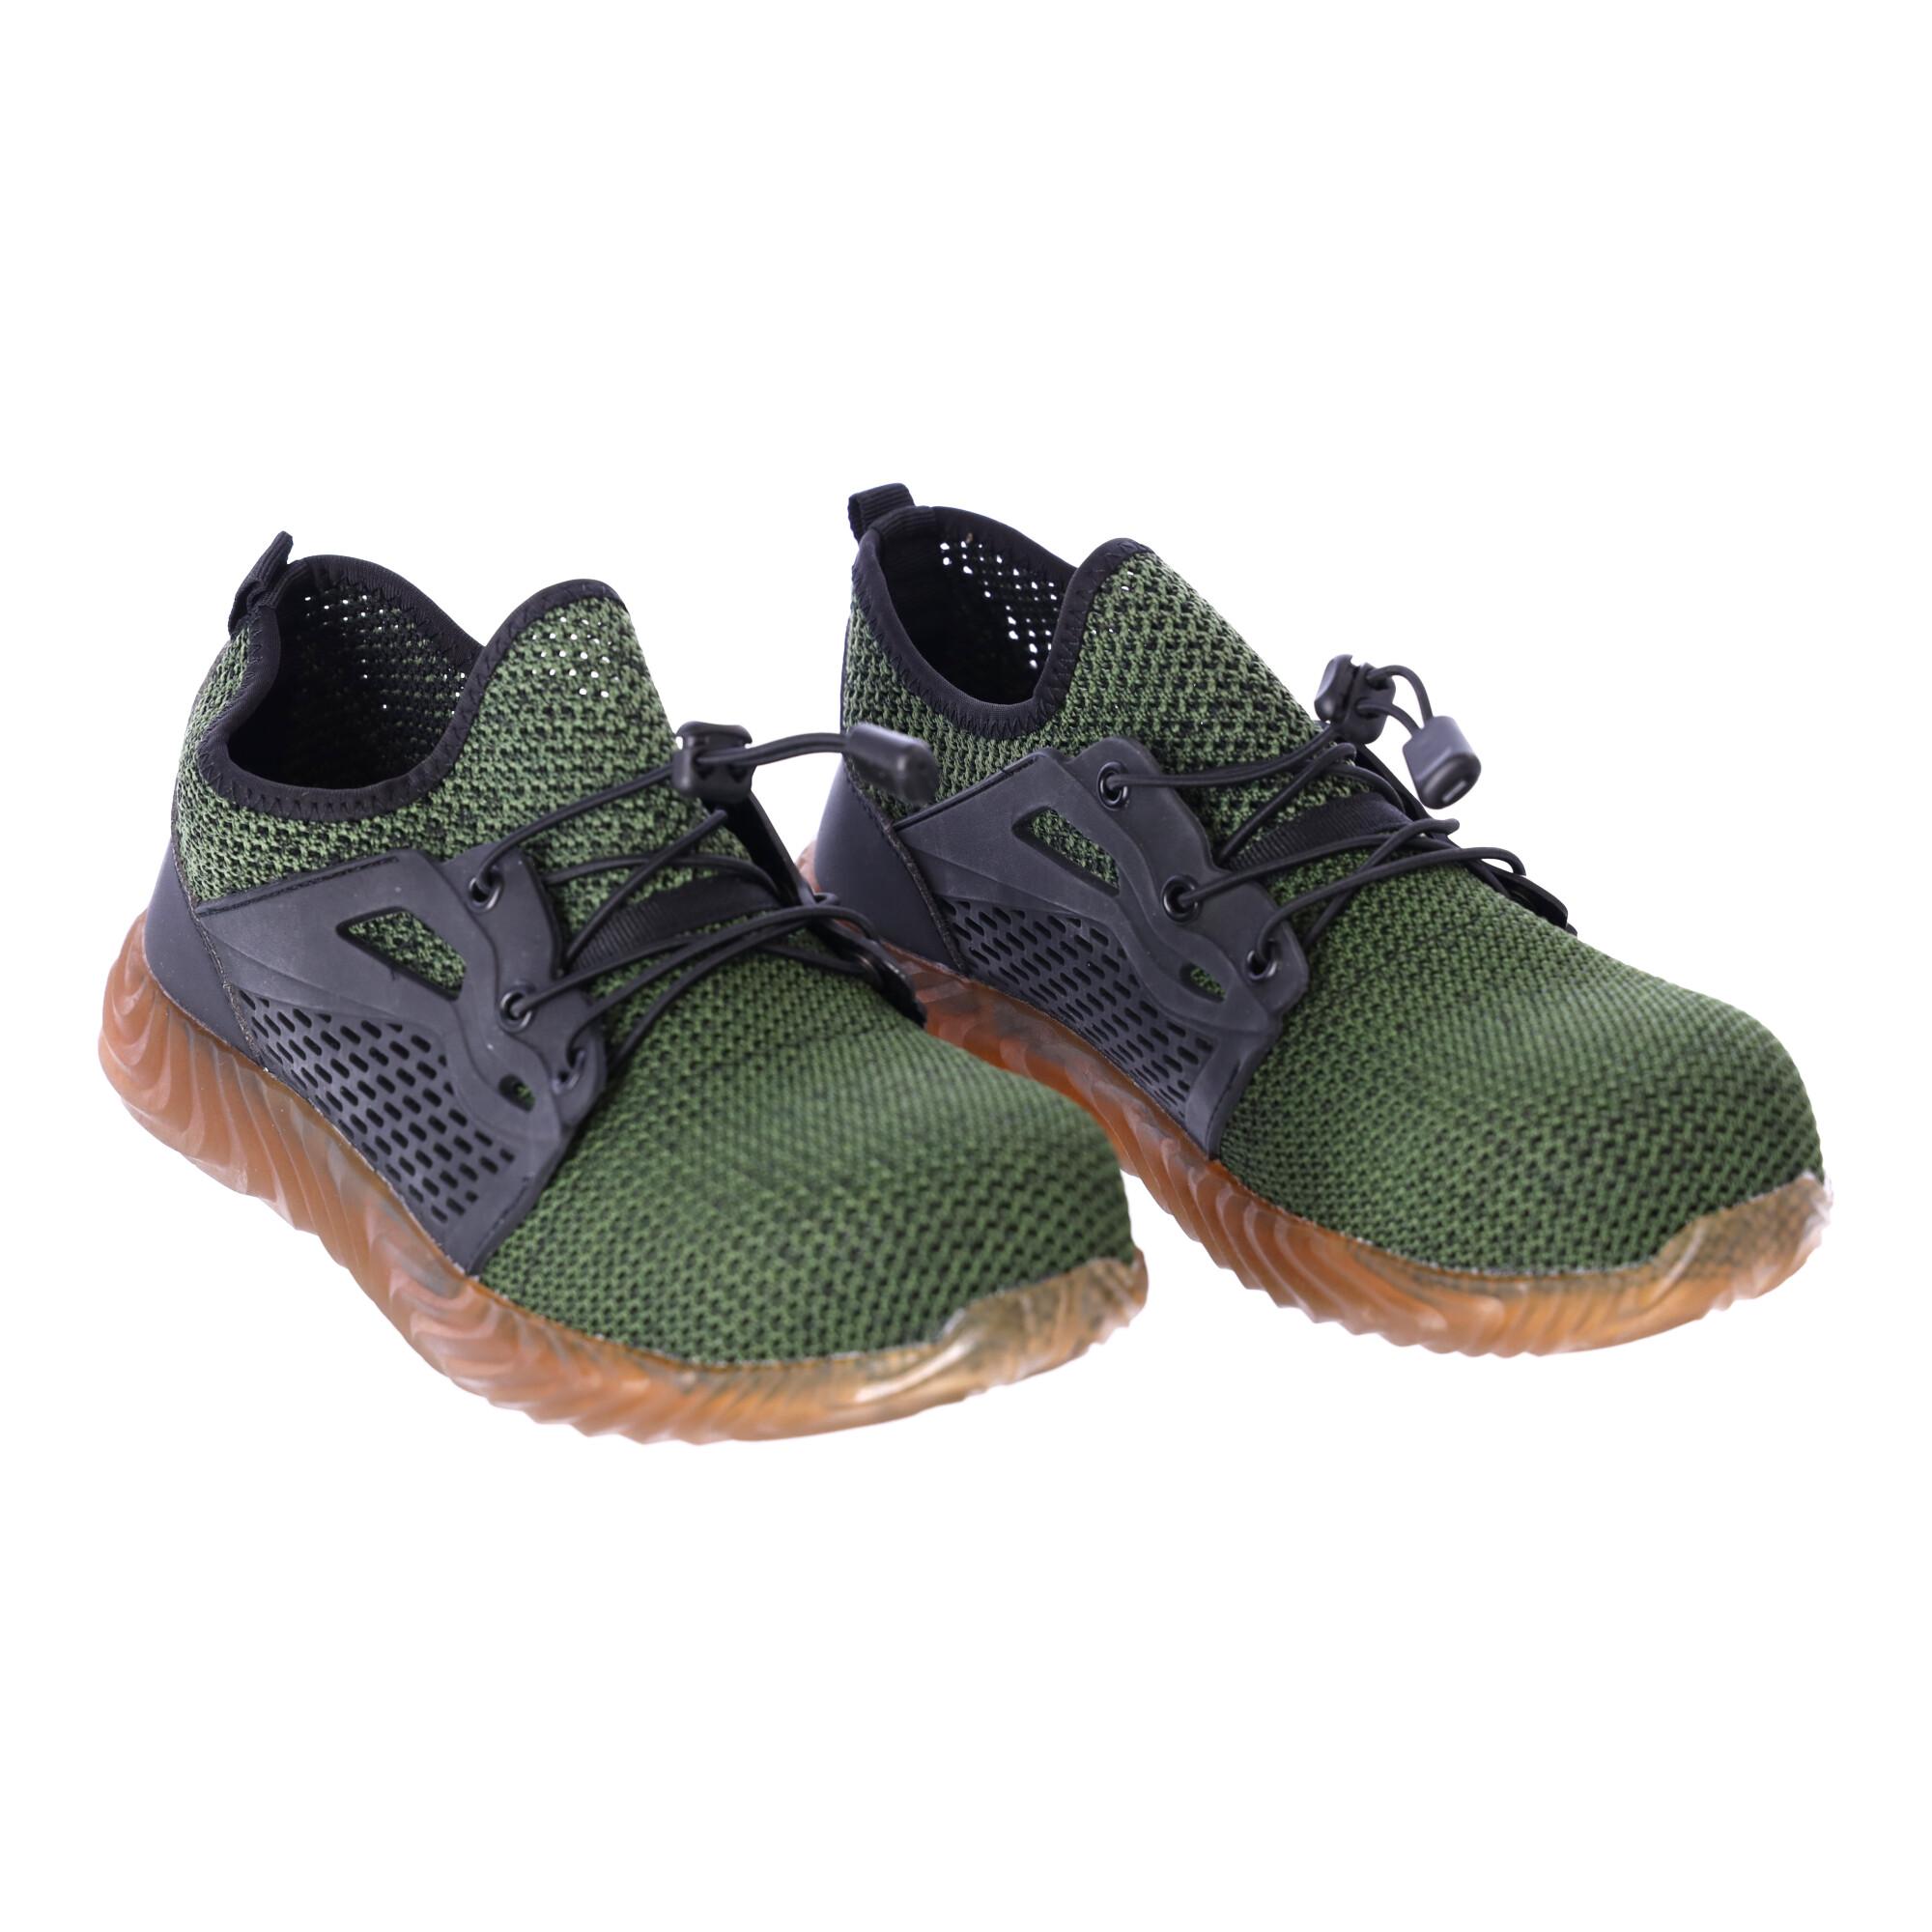 Work safety shoes Soft "42" - green